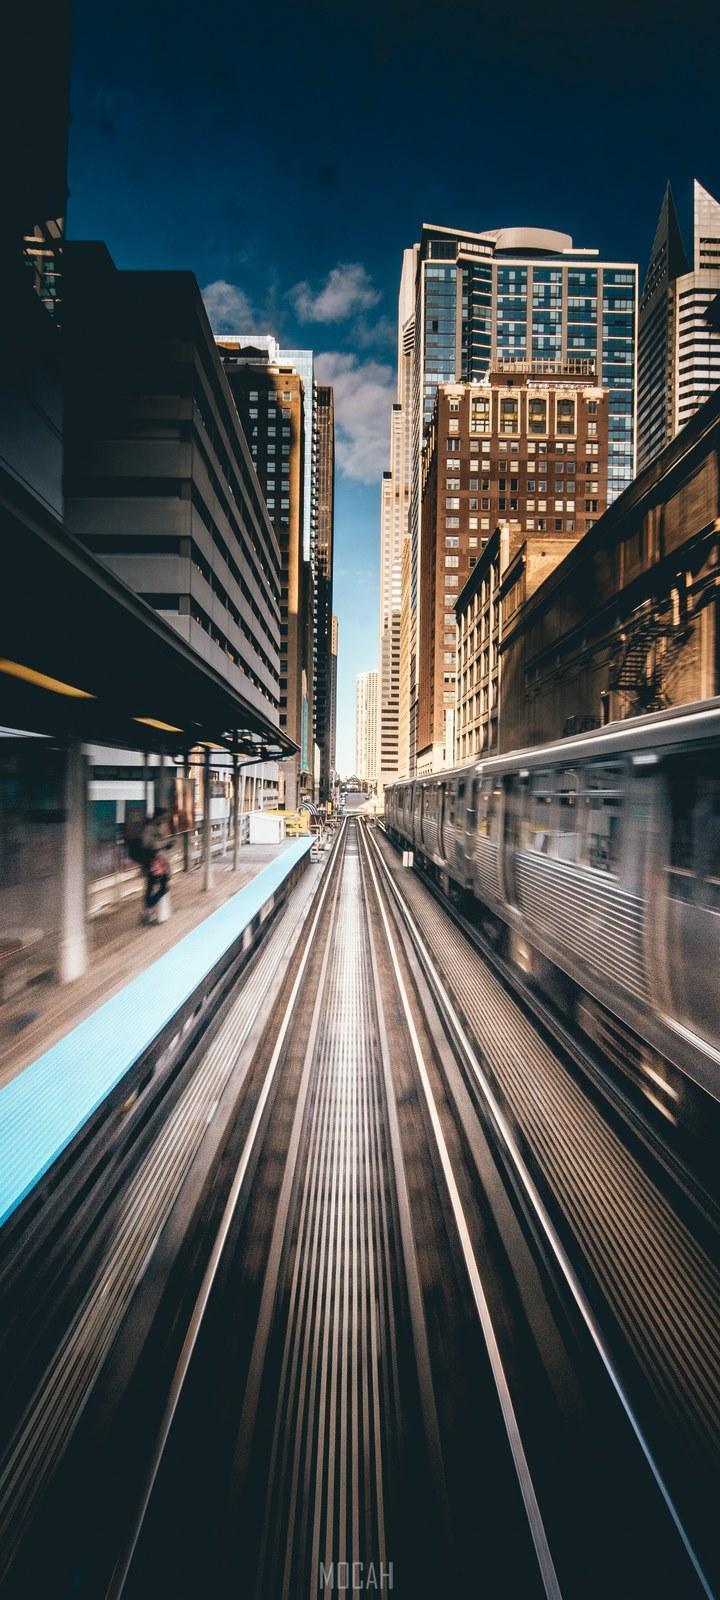 HD wallpaper, A Blurred Image Showing Trains Moving On An Outdoor Railway In Chicago, Samsung Galaxy A21S Wallpaper Download, Train Station Action In Chicago, 720X1600